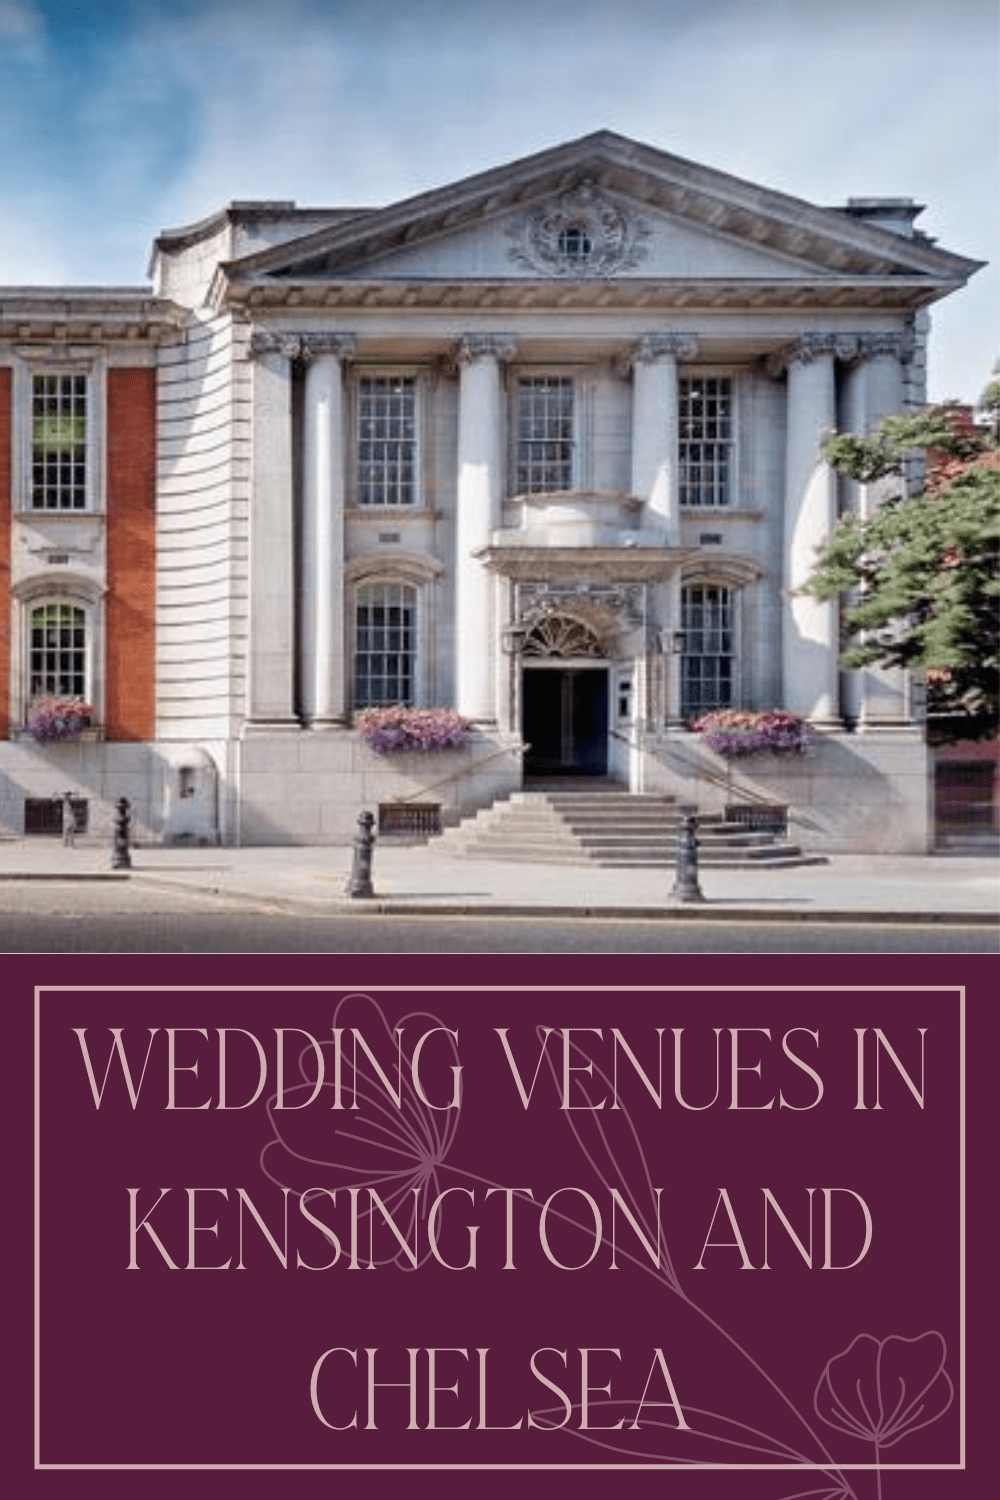 blog recommending 6 wedding venues in Chelsea and Kensington